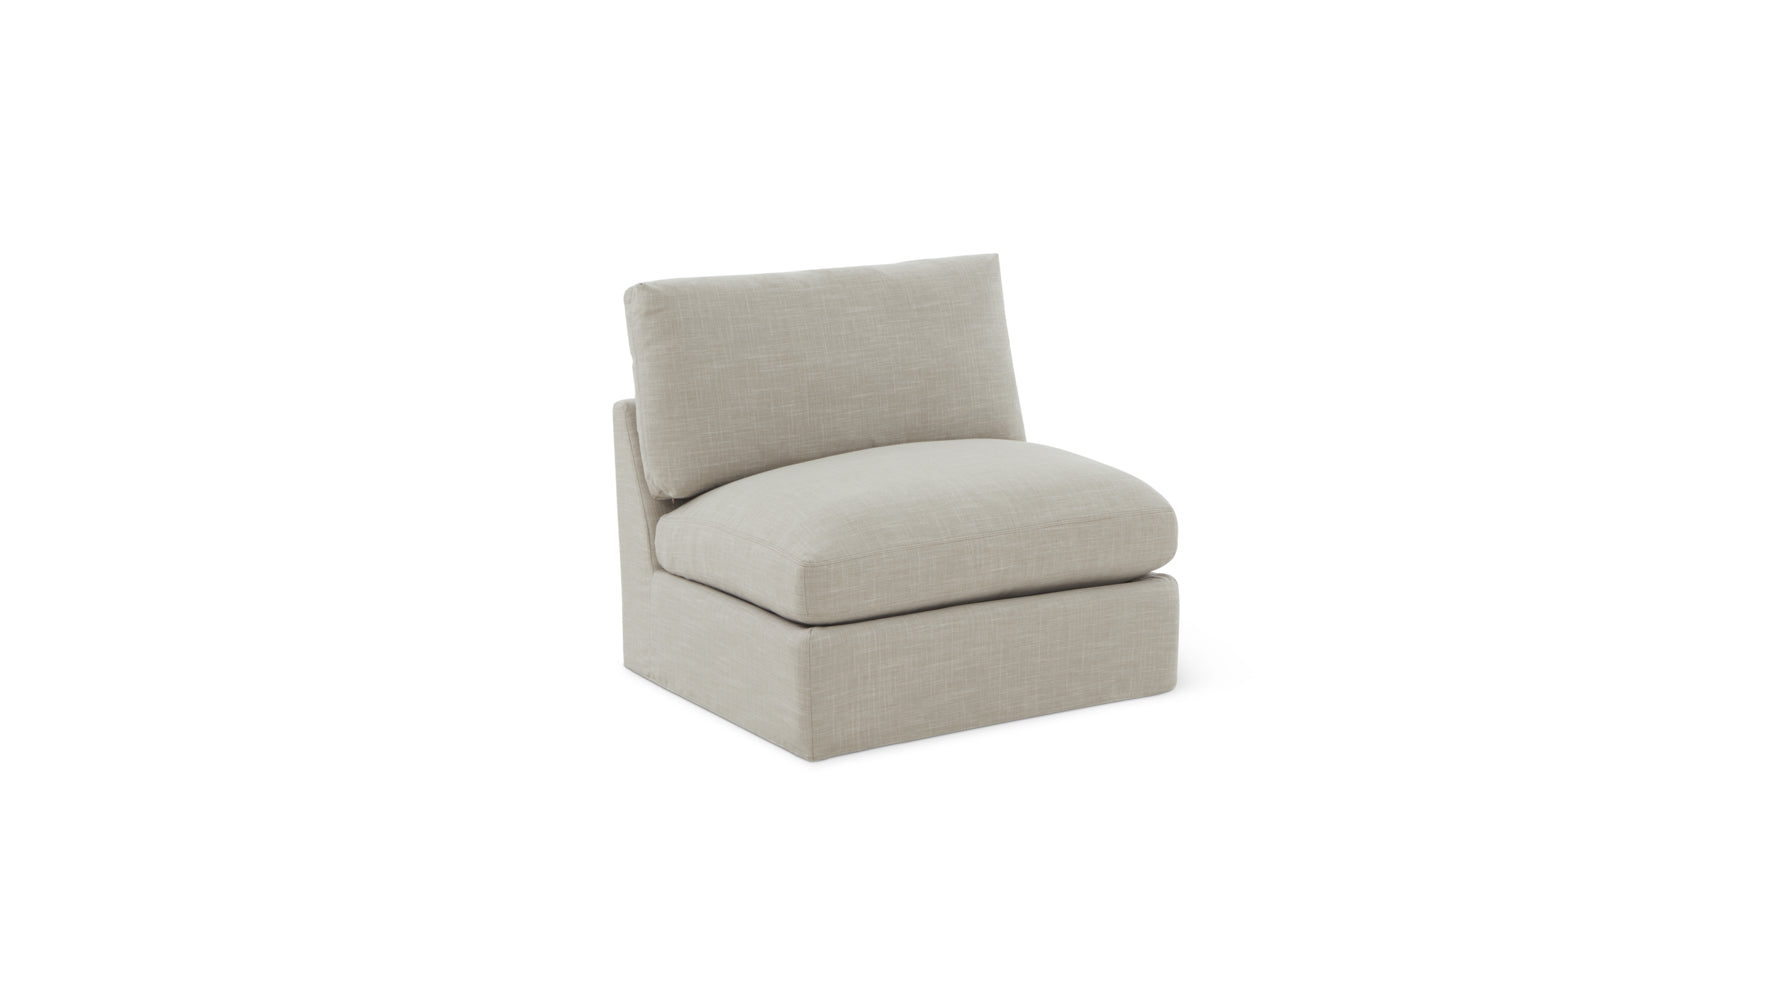 Get Together™ Armless Chair, Standard, Light Pebble - Image 6